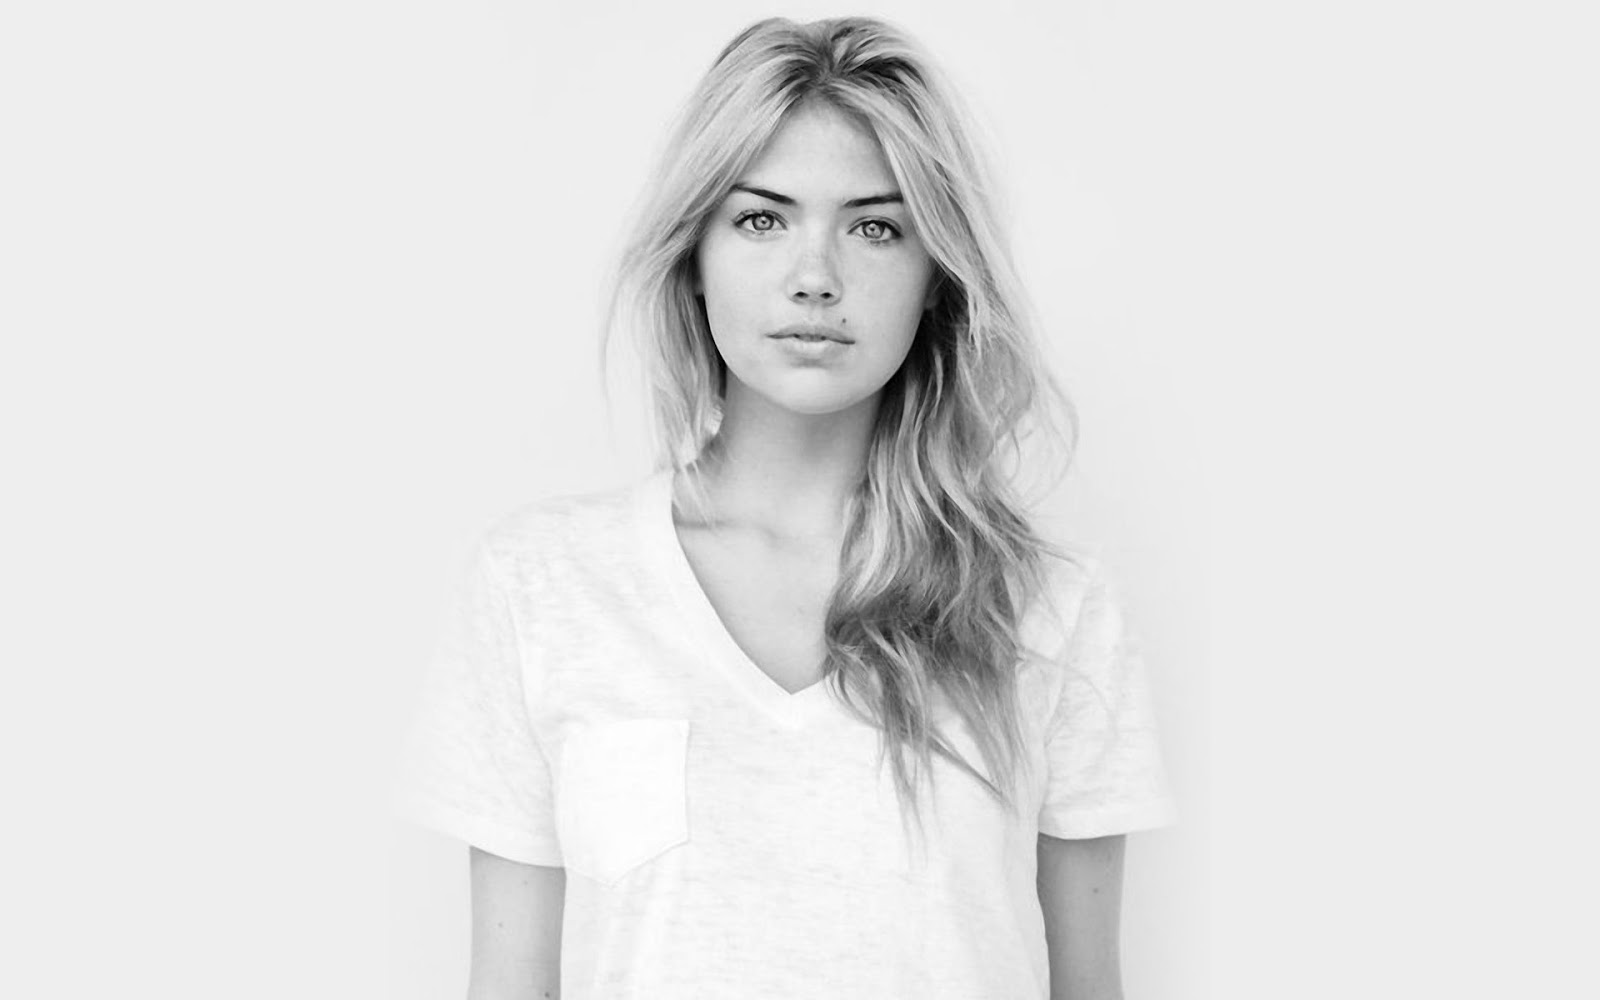 Hq Definition Wallpaper Of Kate Upton